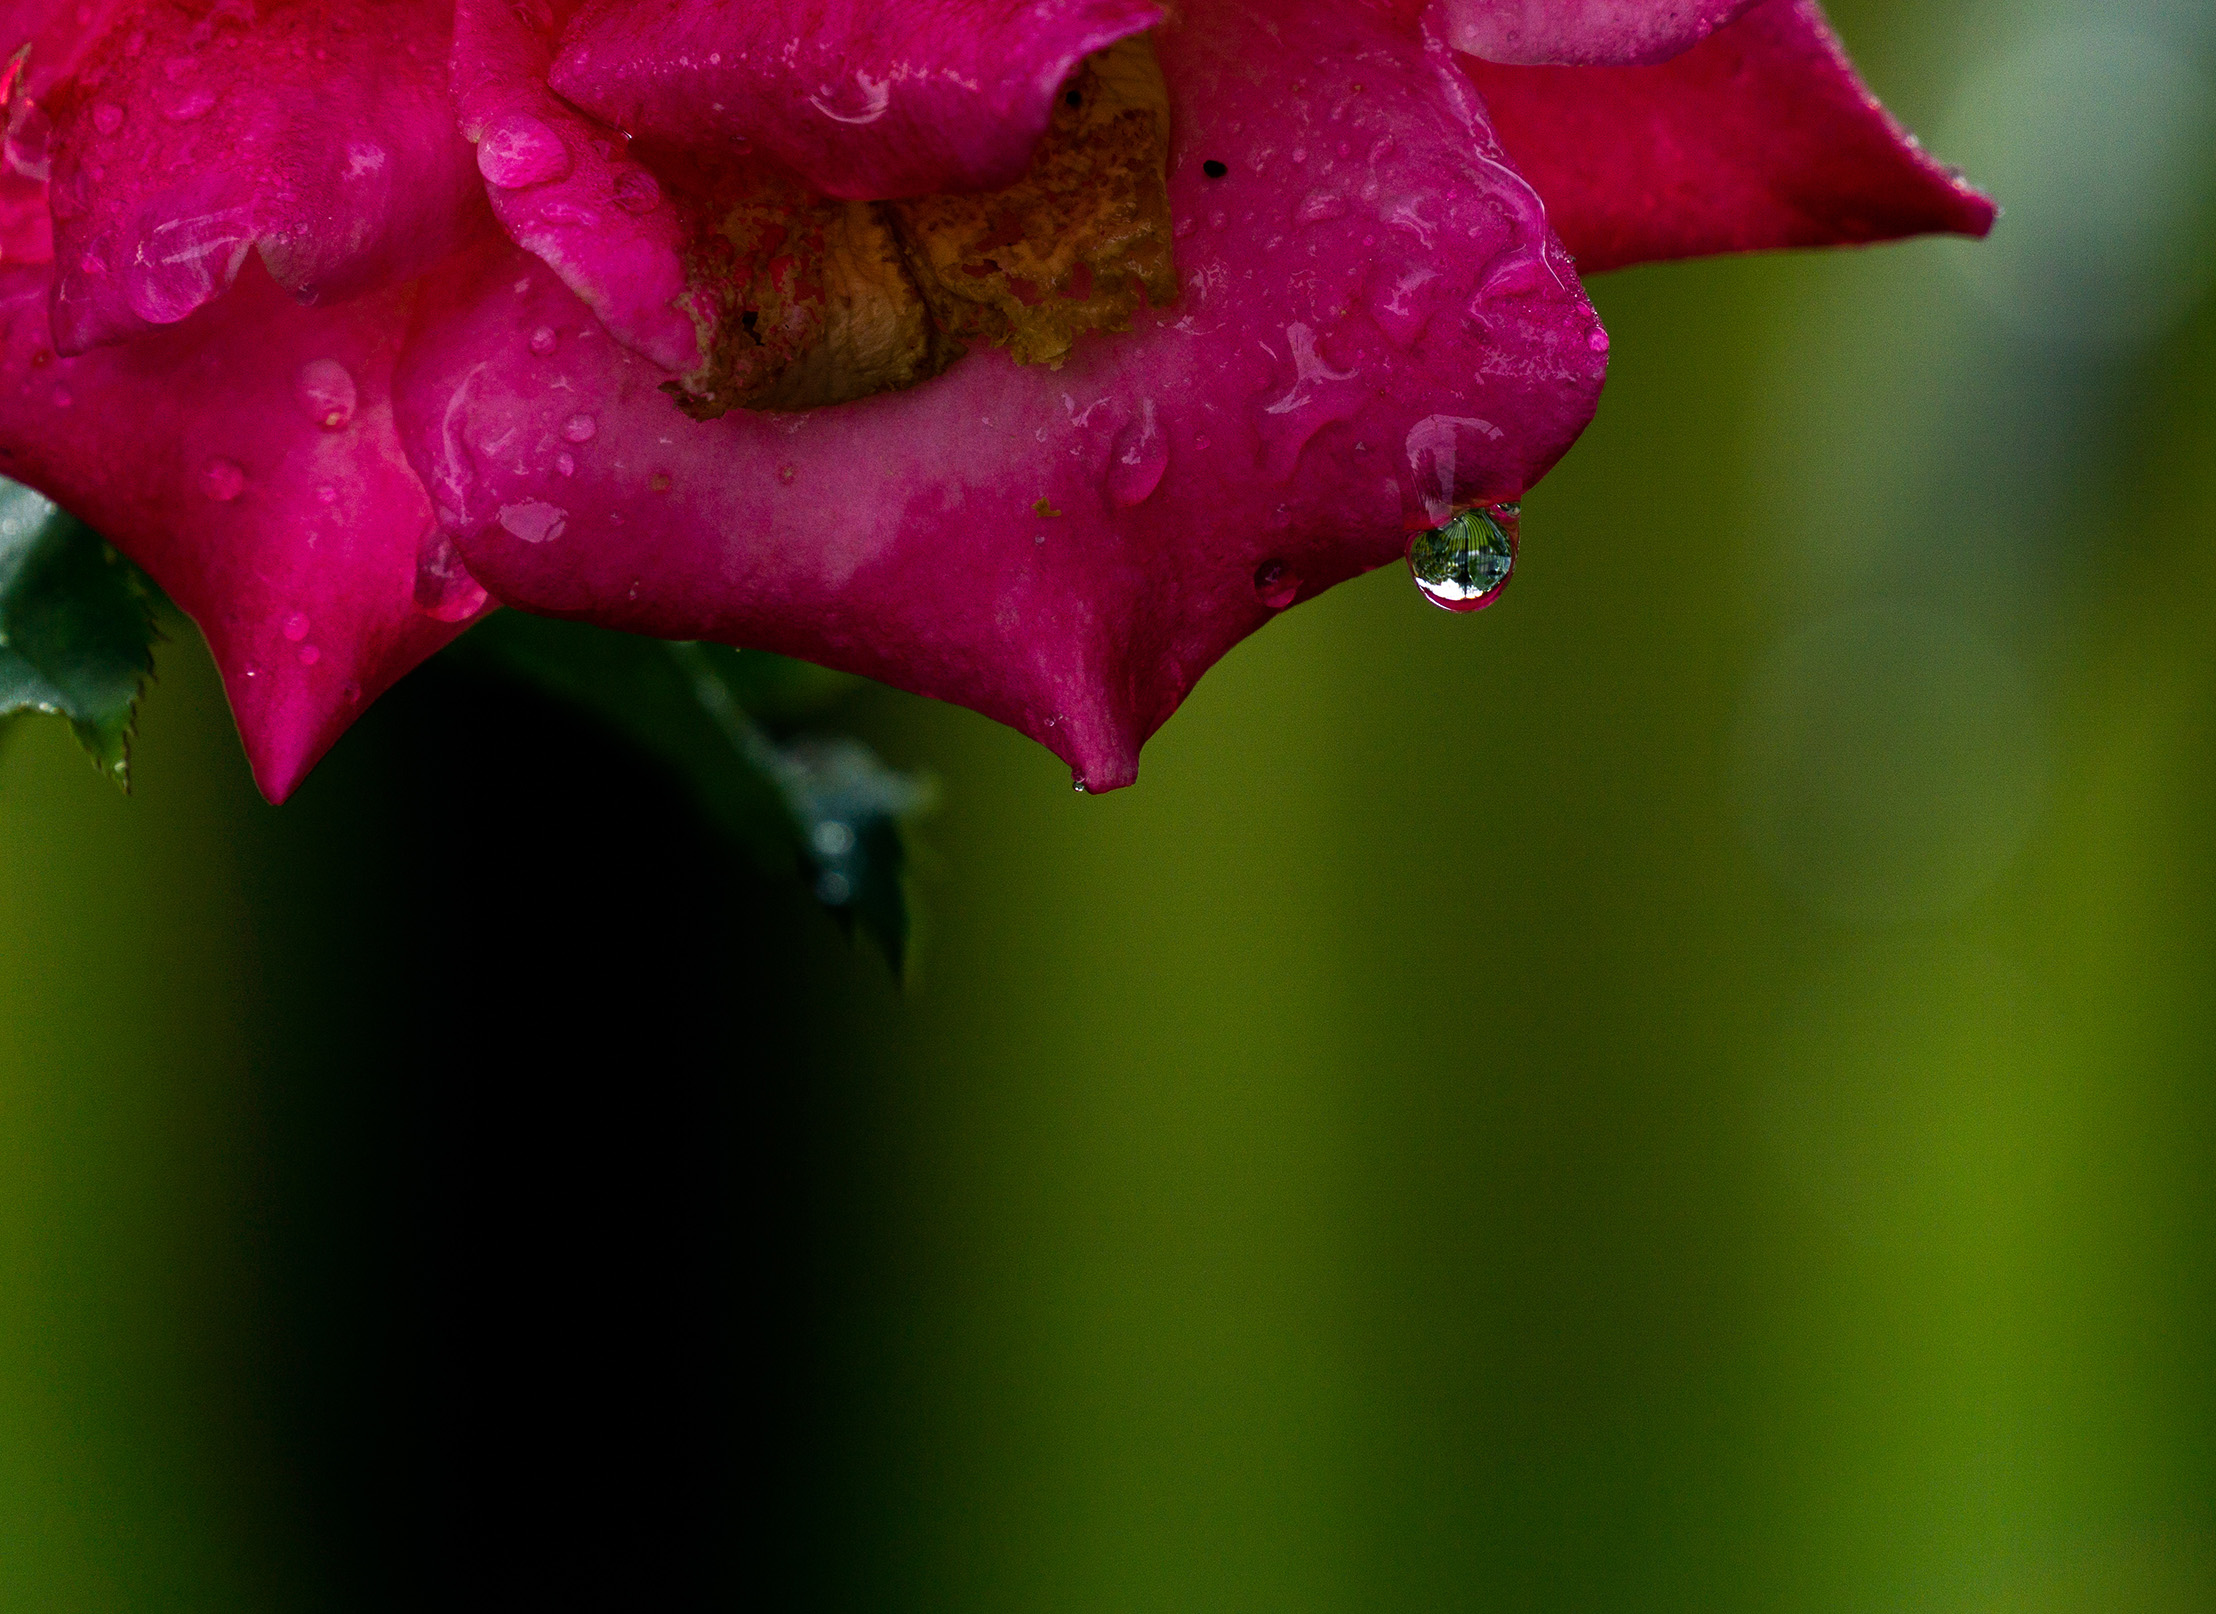 A deep red rose with dew drop that shows an upside down world